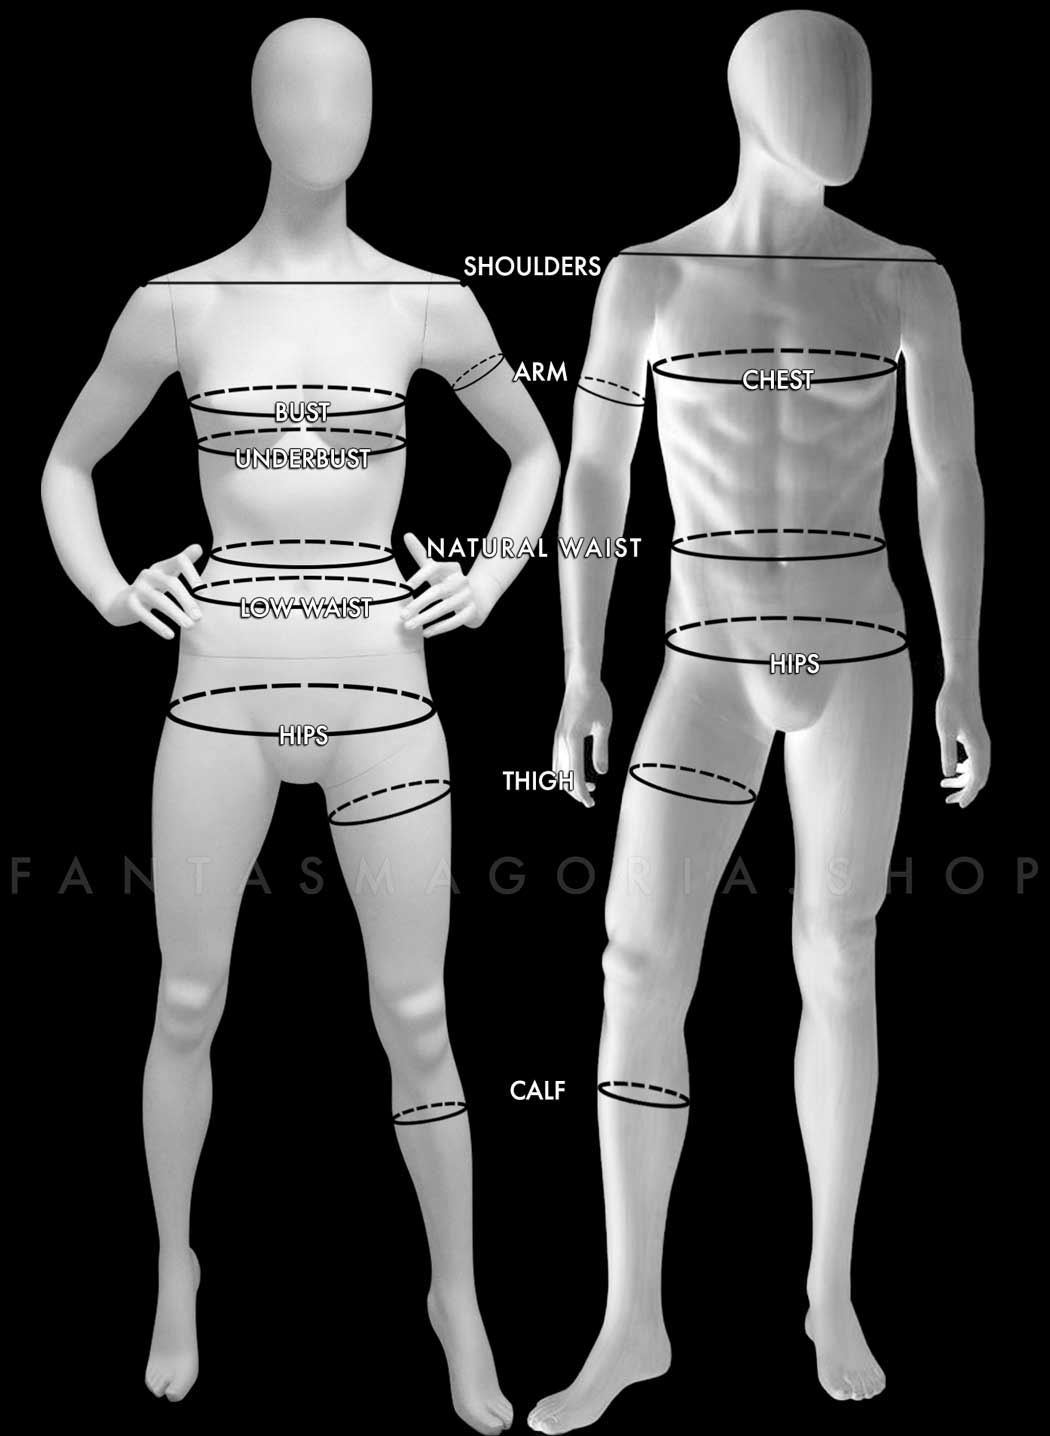 Female and Male mannequin bodies